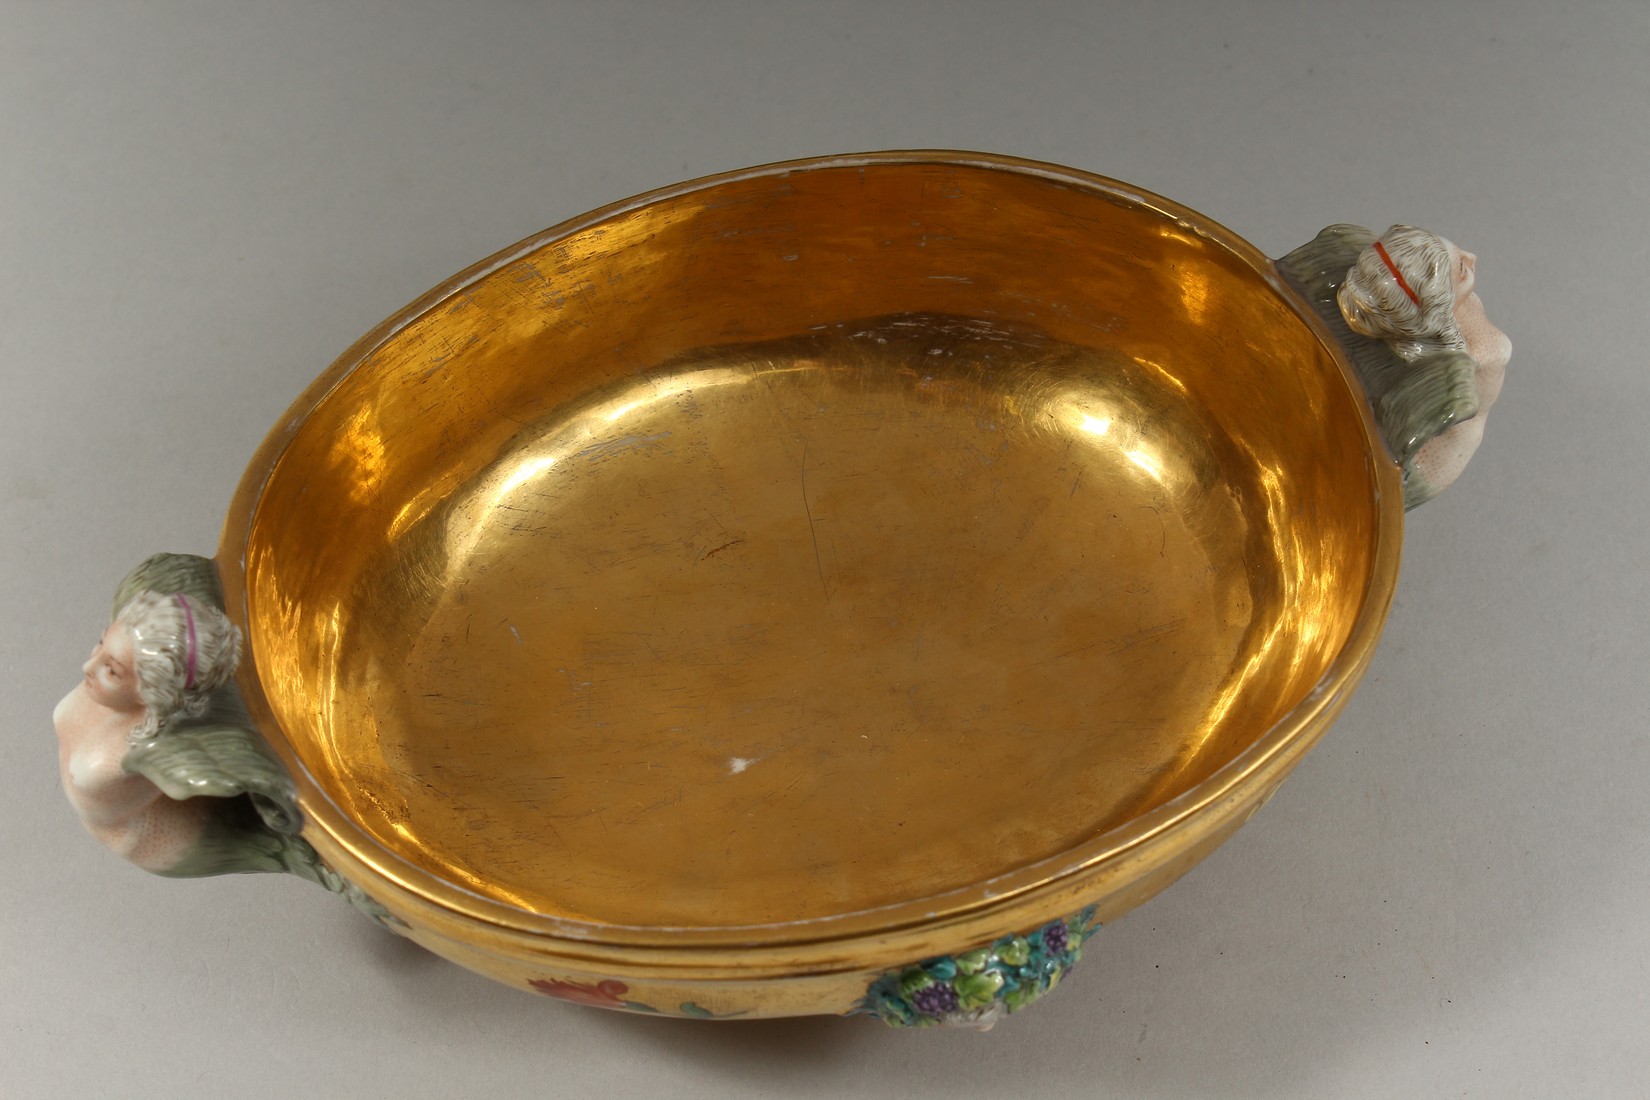 A GOOD BERLIN GILT GROUND OVAL BOWL with mermaid handles, masks and flowers. 8.5ins long - Image 7 of 8